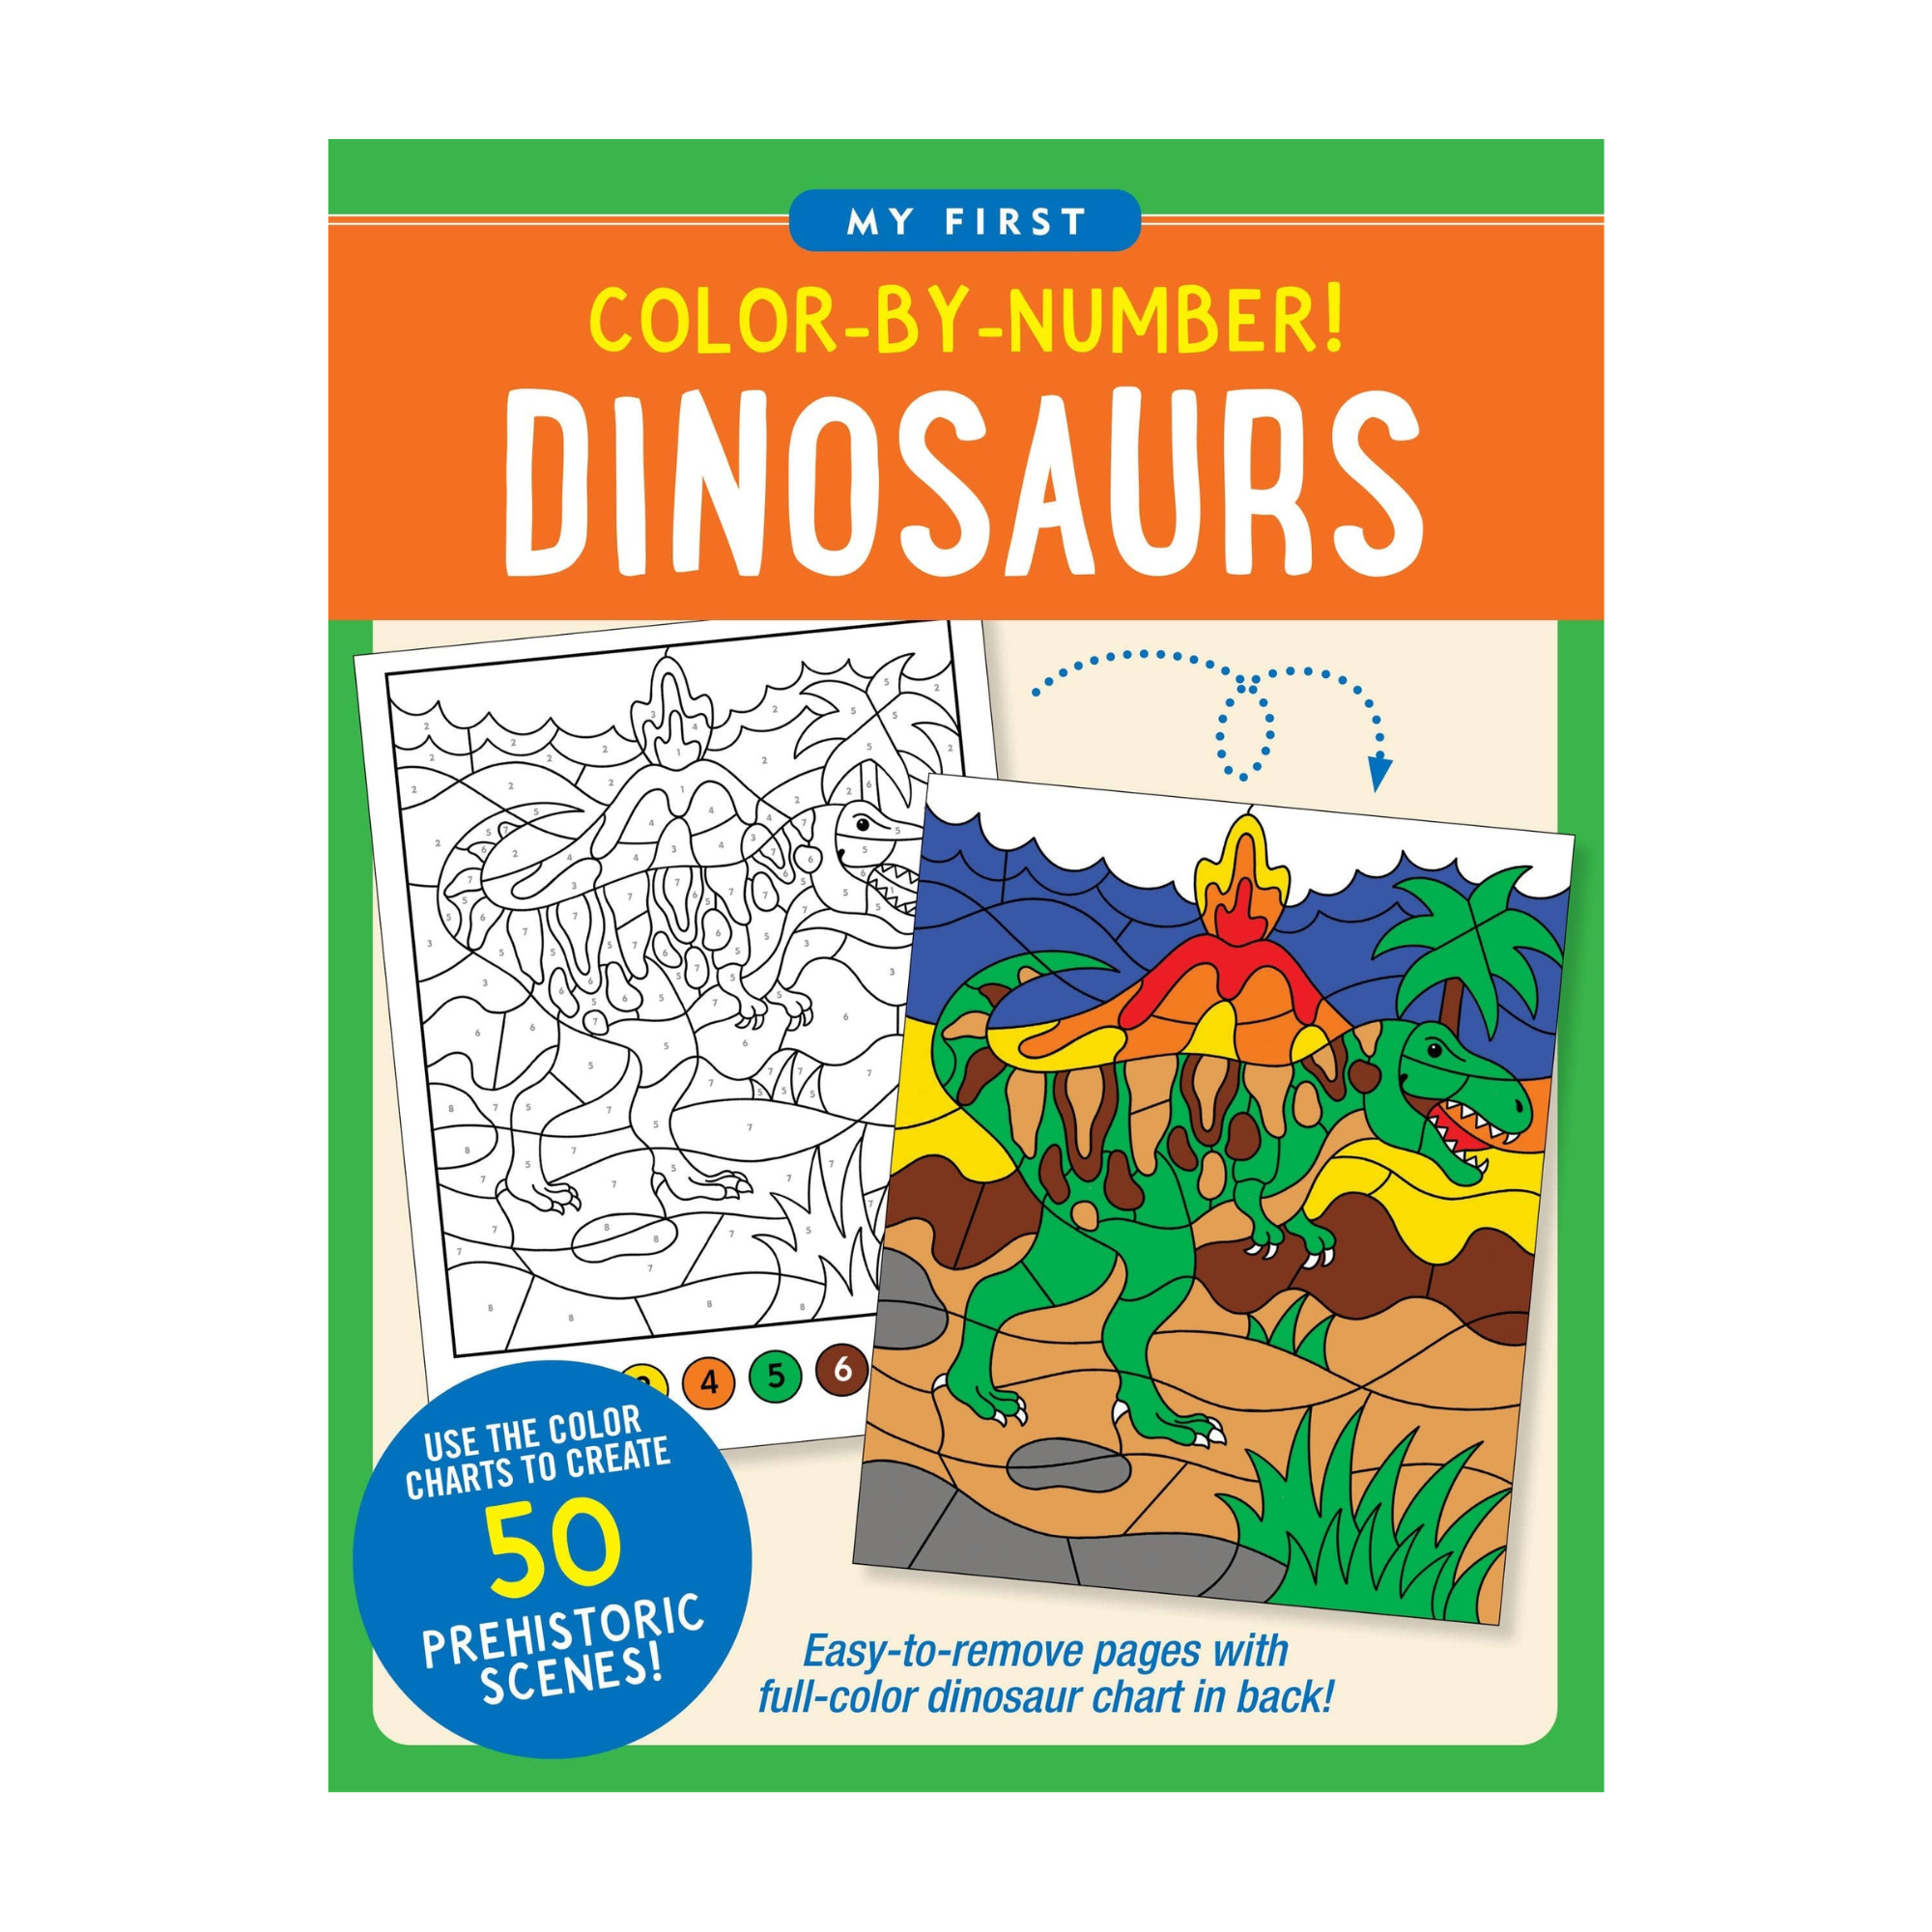 Color-by-Number! Dinosaurs